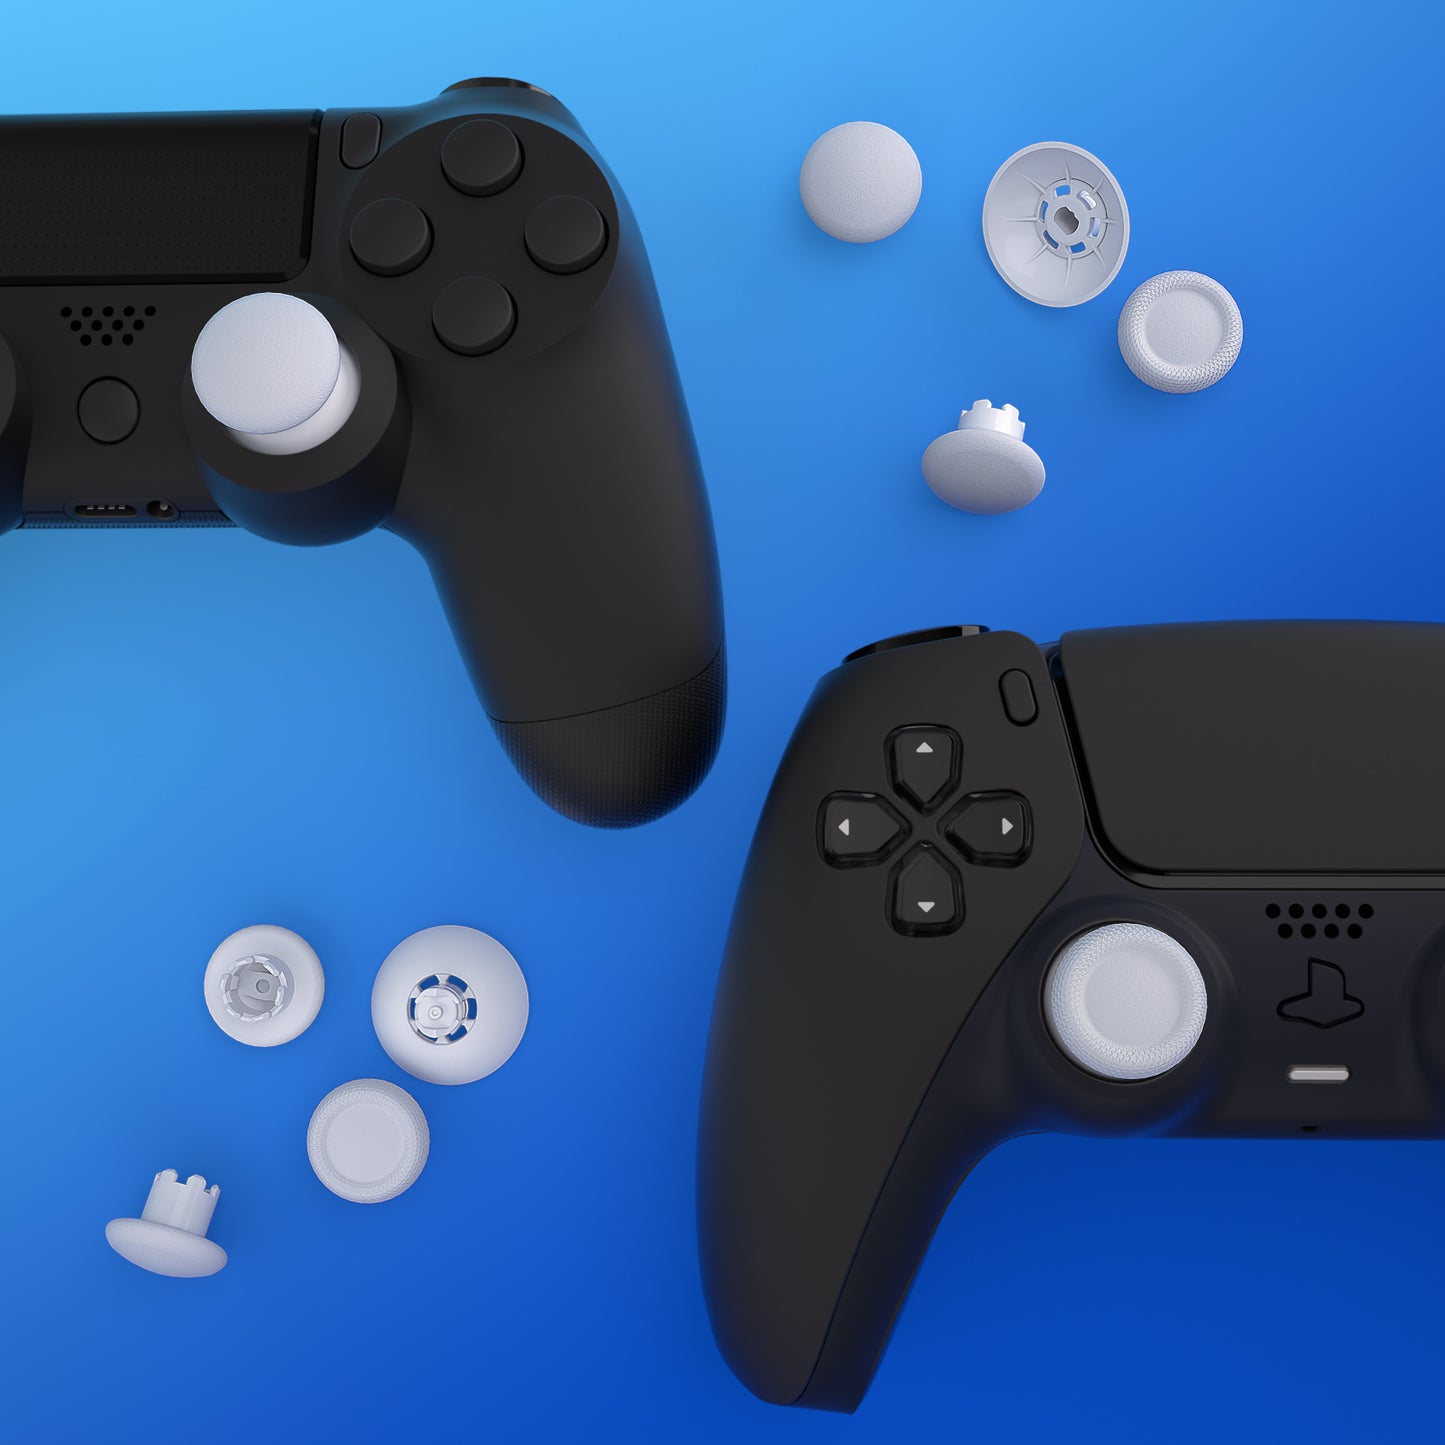 EDGE Sticks Replacement Interchangeable Thumbsticks for PS5 & PS4 All Model Controllers - Solid White eXtremeRate